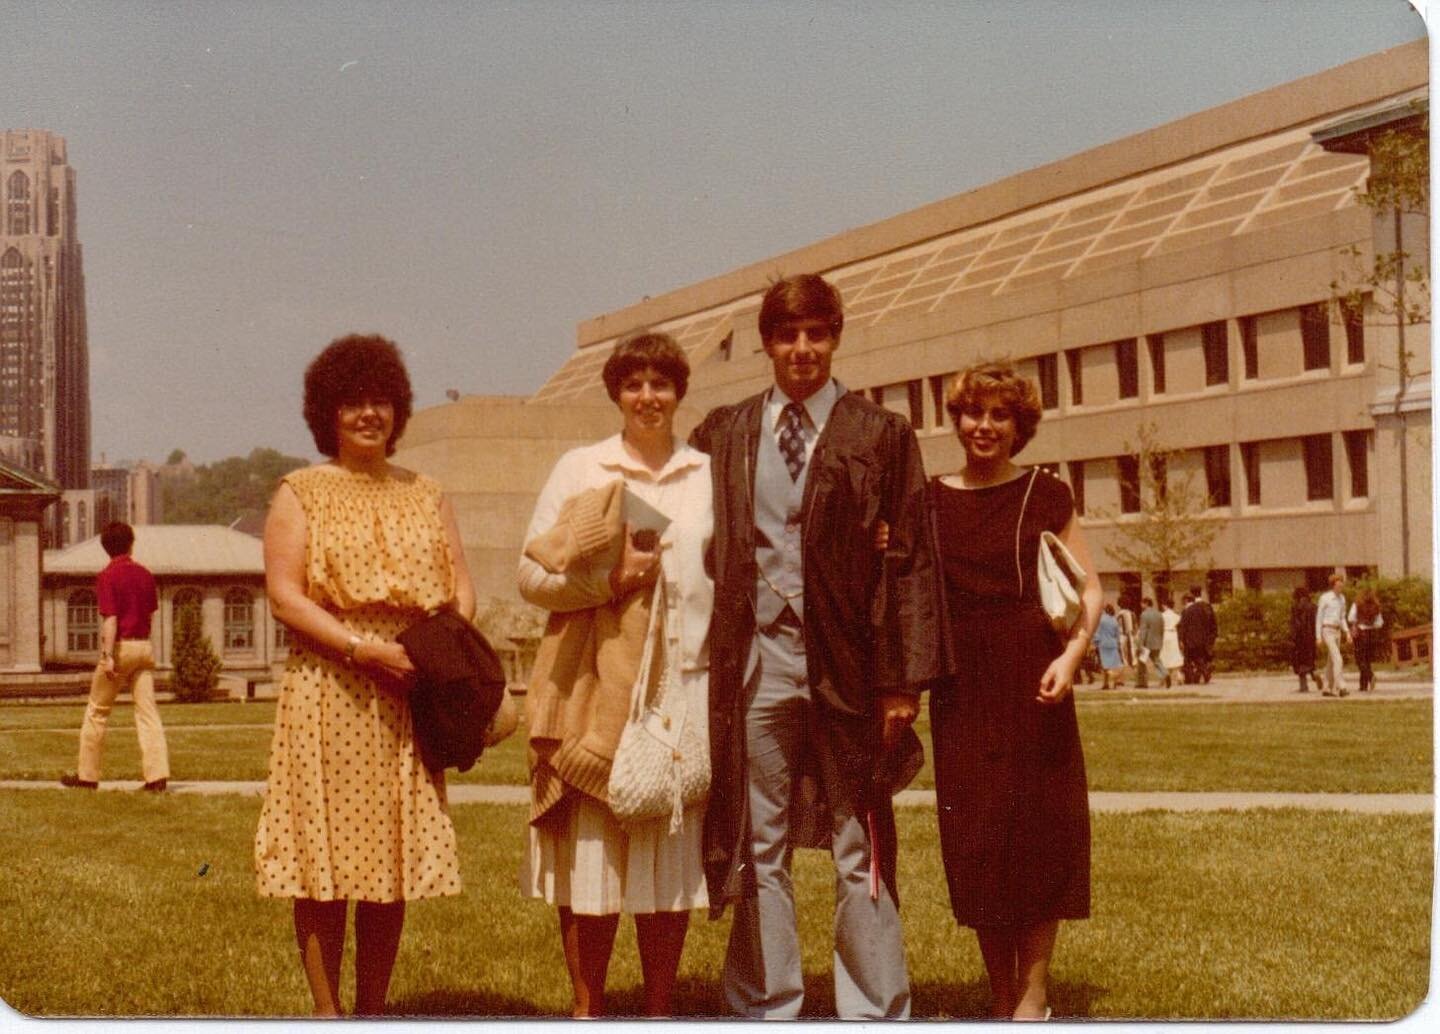 #TBT to my @carnegiemellon graduation. I graduated in 1979 with a Bachelors of Science in Civil Engineering. I went on to get a Masters of Science in Civil/Biomedical Engineering before pursuing medicine. 

I am pictured here with my mom, my aunt Pat